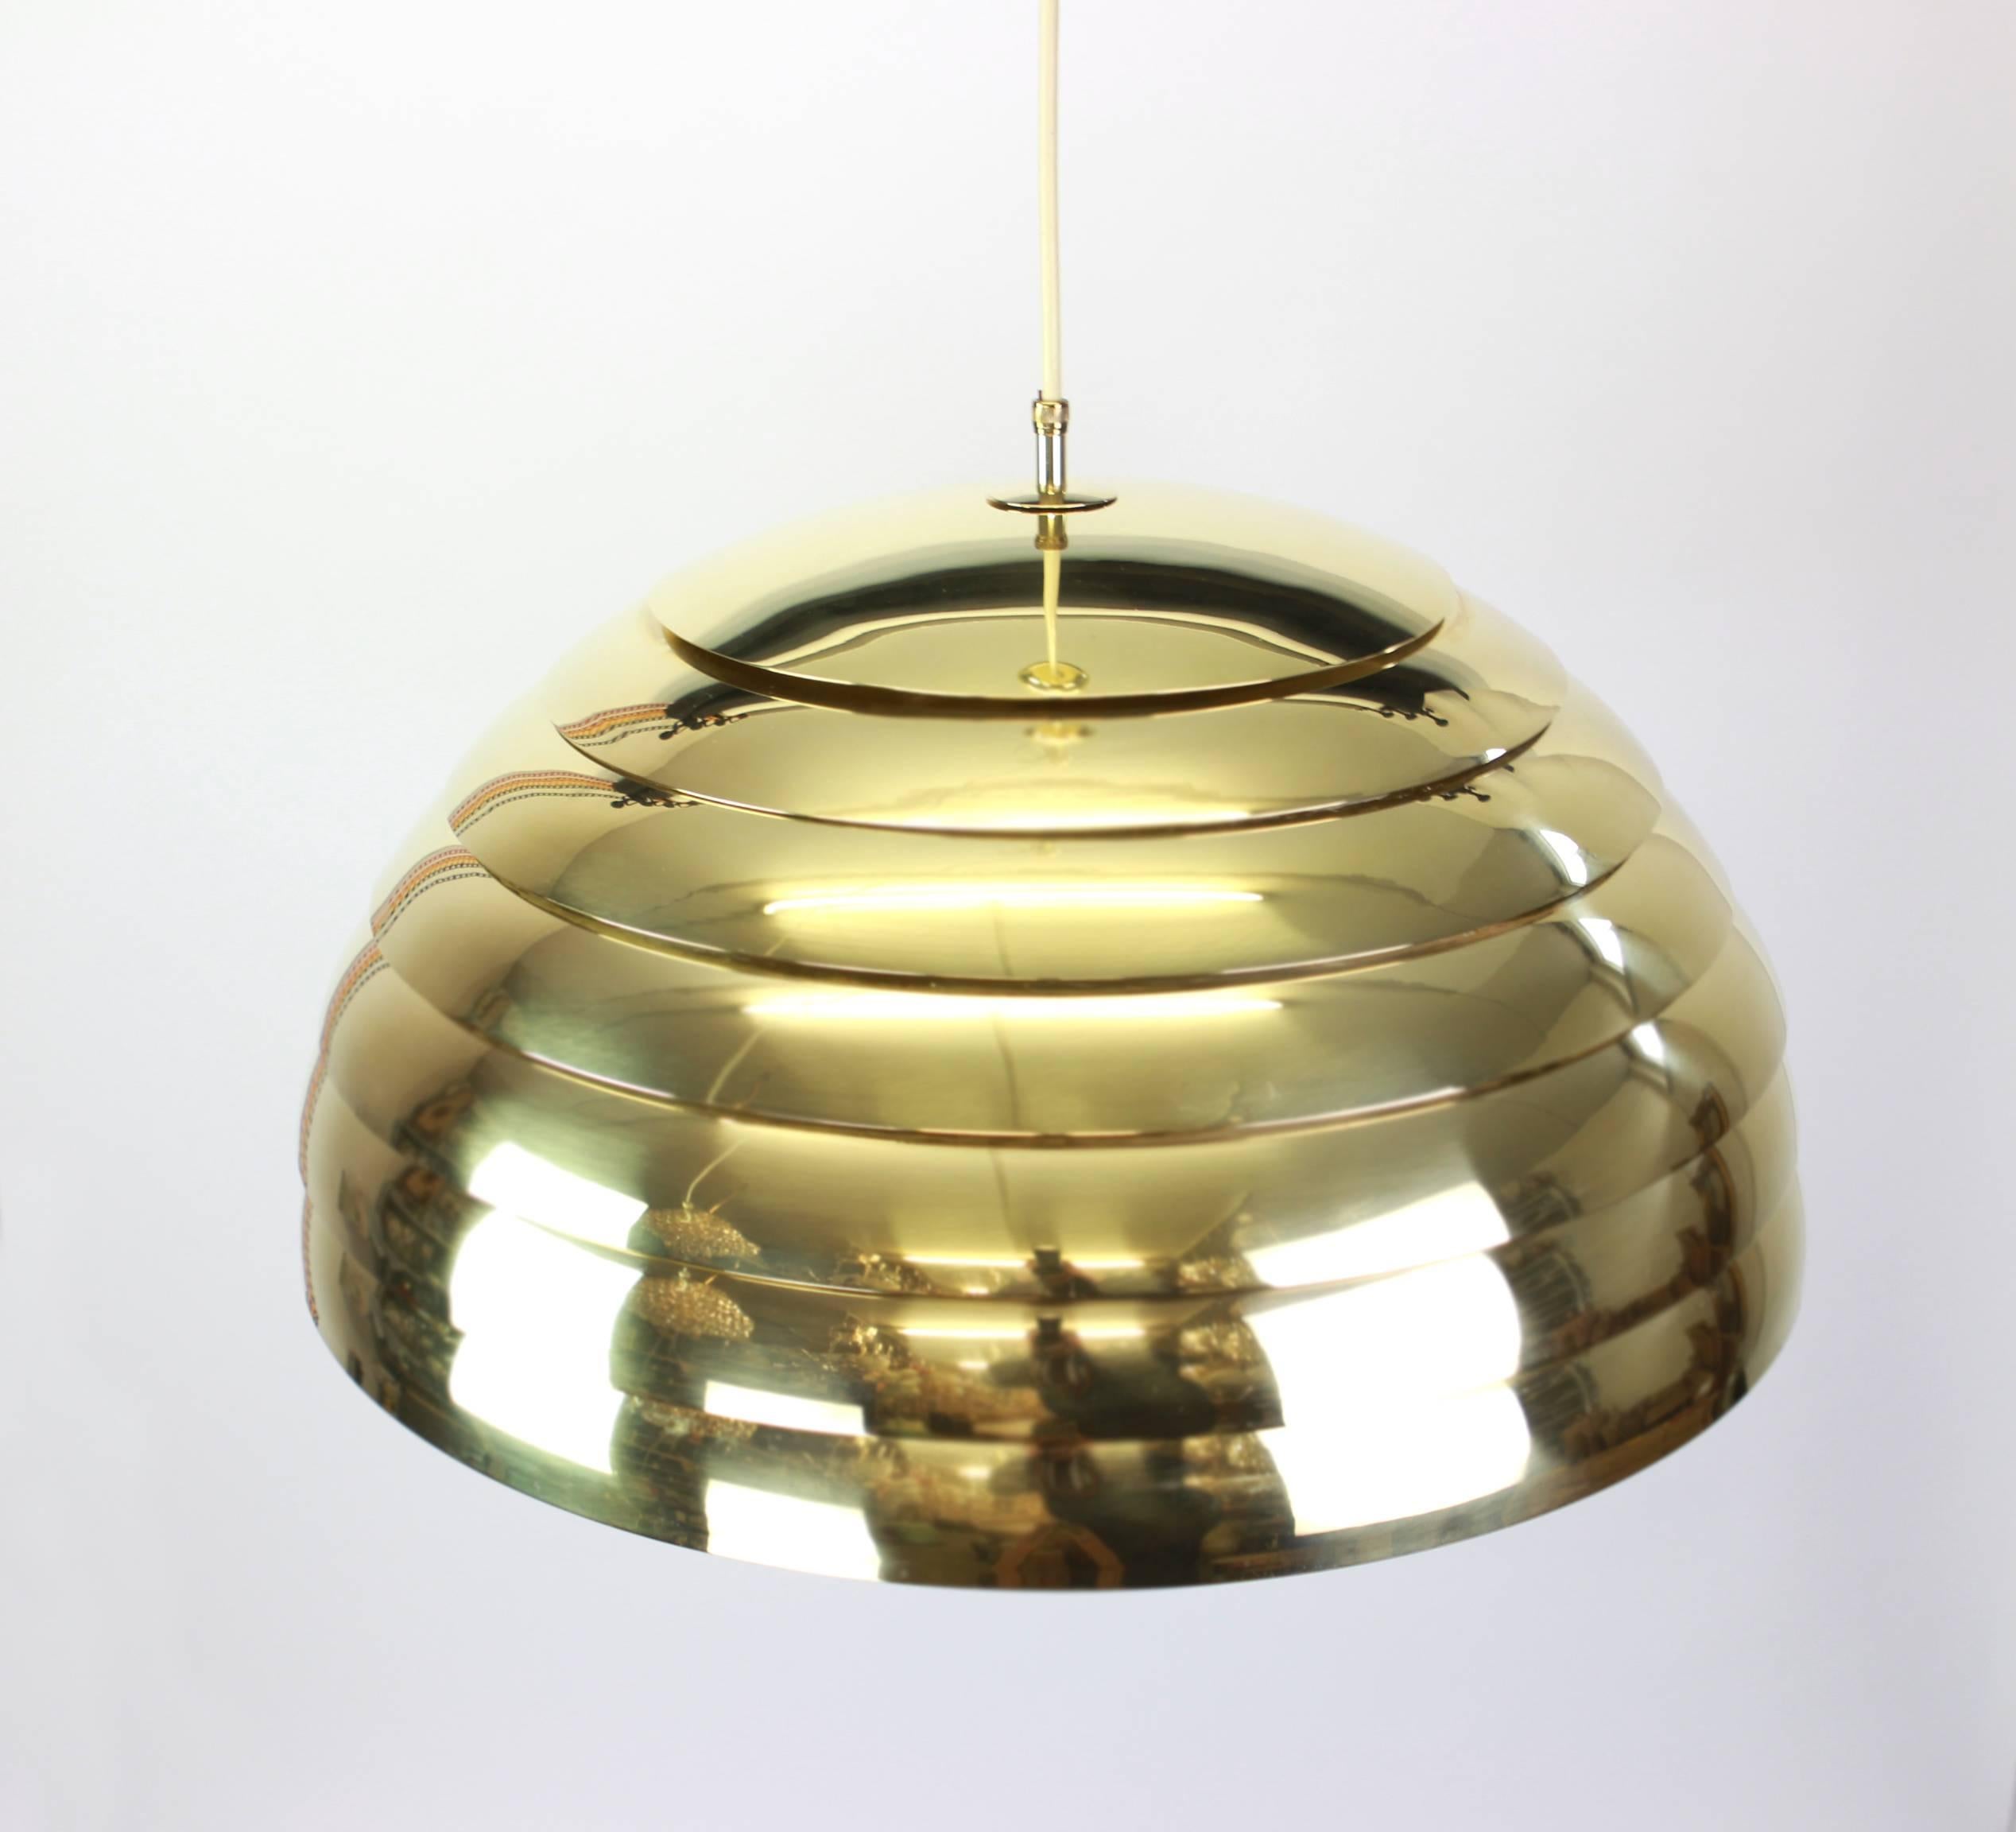 Large brass pendant light designed by Florian Schulz, Germany, 1970s.

High quality and in very good condition. Cleaned, well-wired and ready to use. 

The fixture requires one Standard bulb and is compatible with the US/UK/ etc .. standards.

The